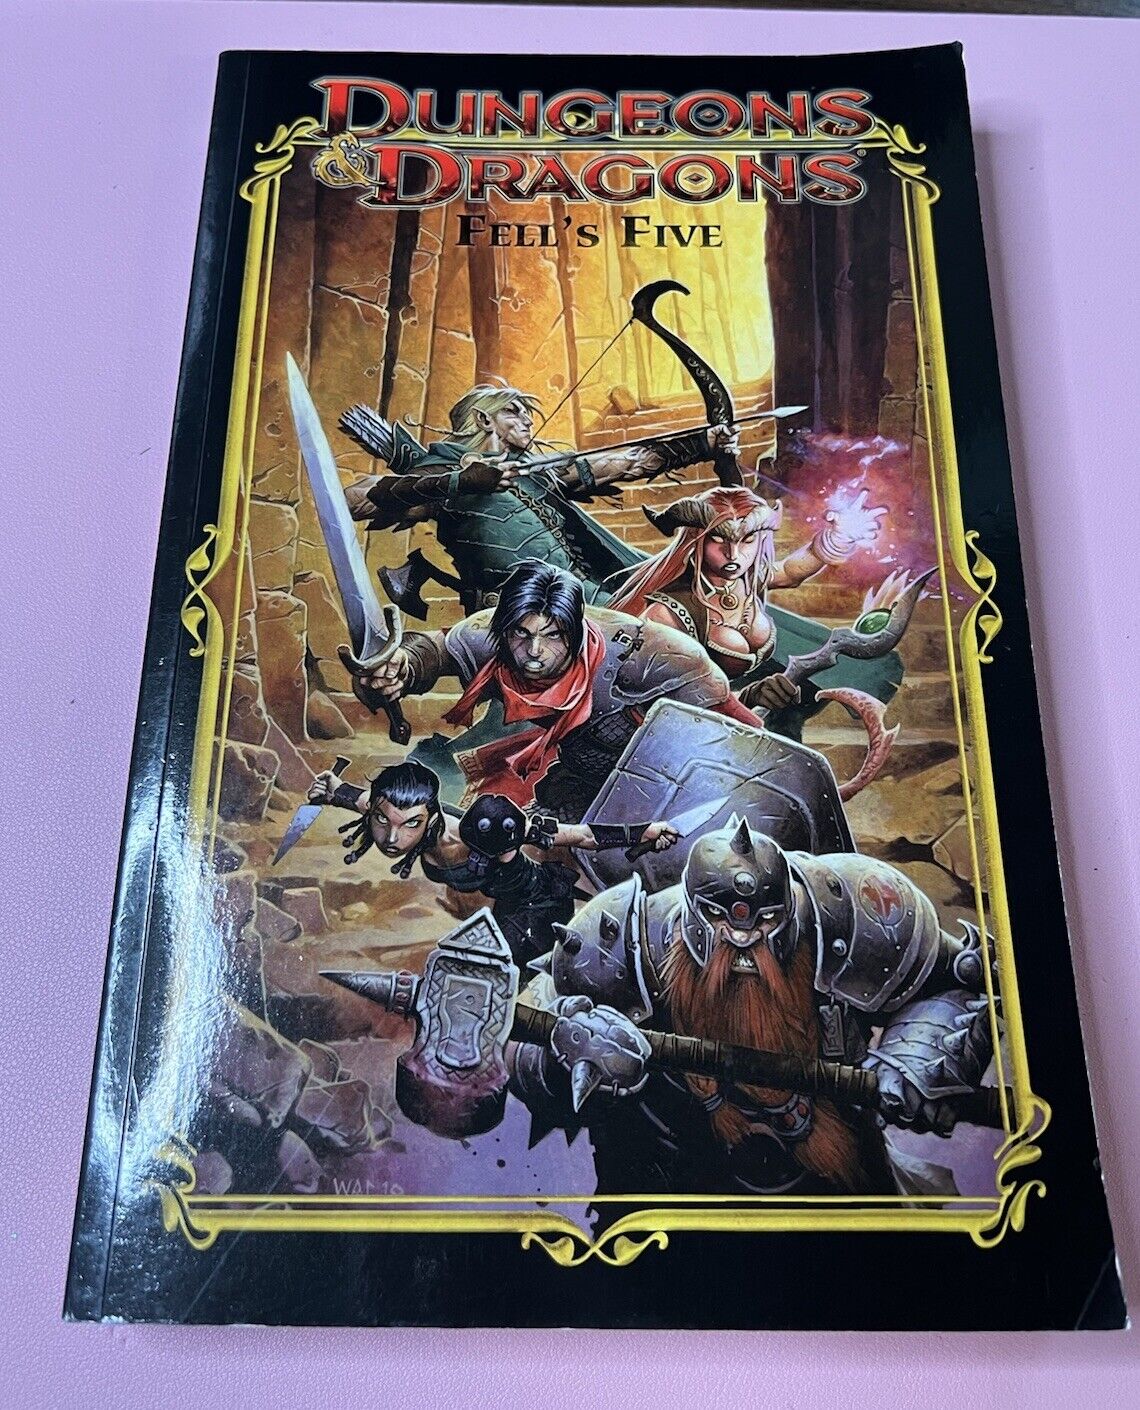 DUNGEONS and DRAGONS Fell's Five 1st Printing TPB Graphic Novel - John Rogers